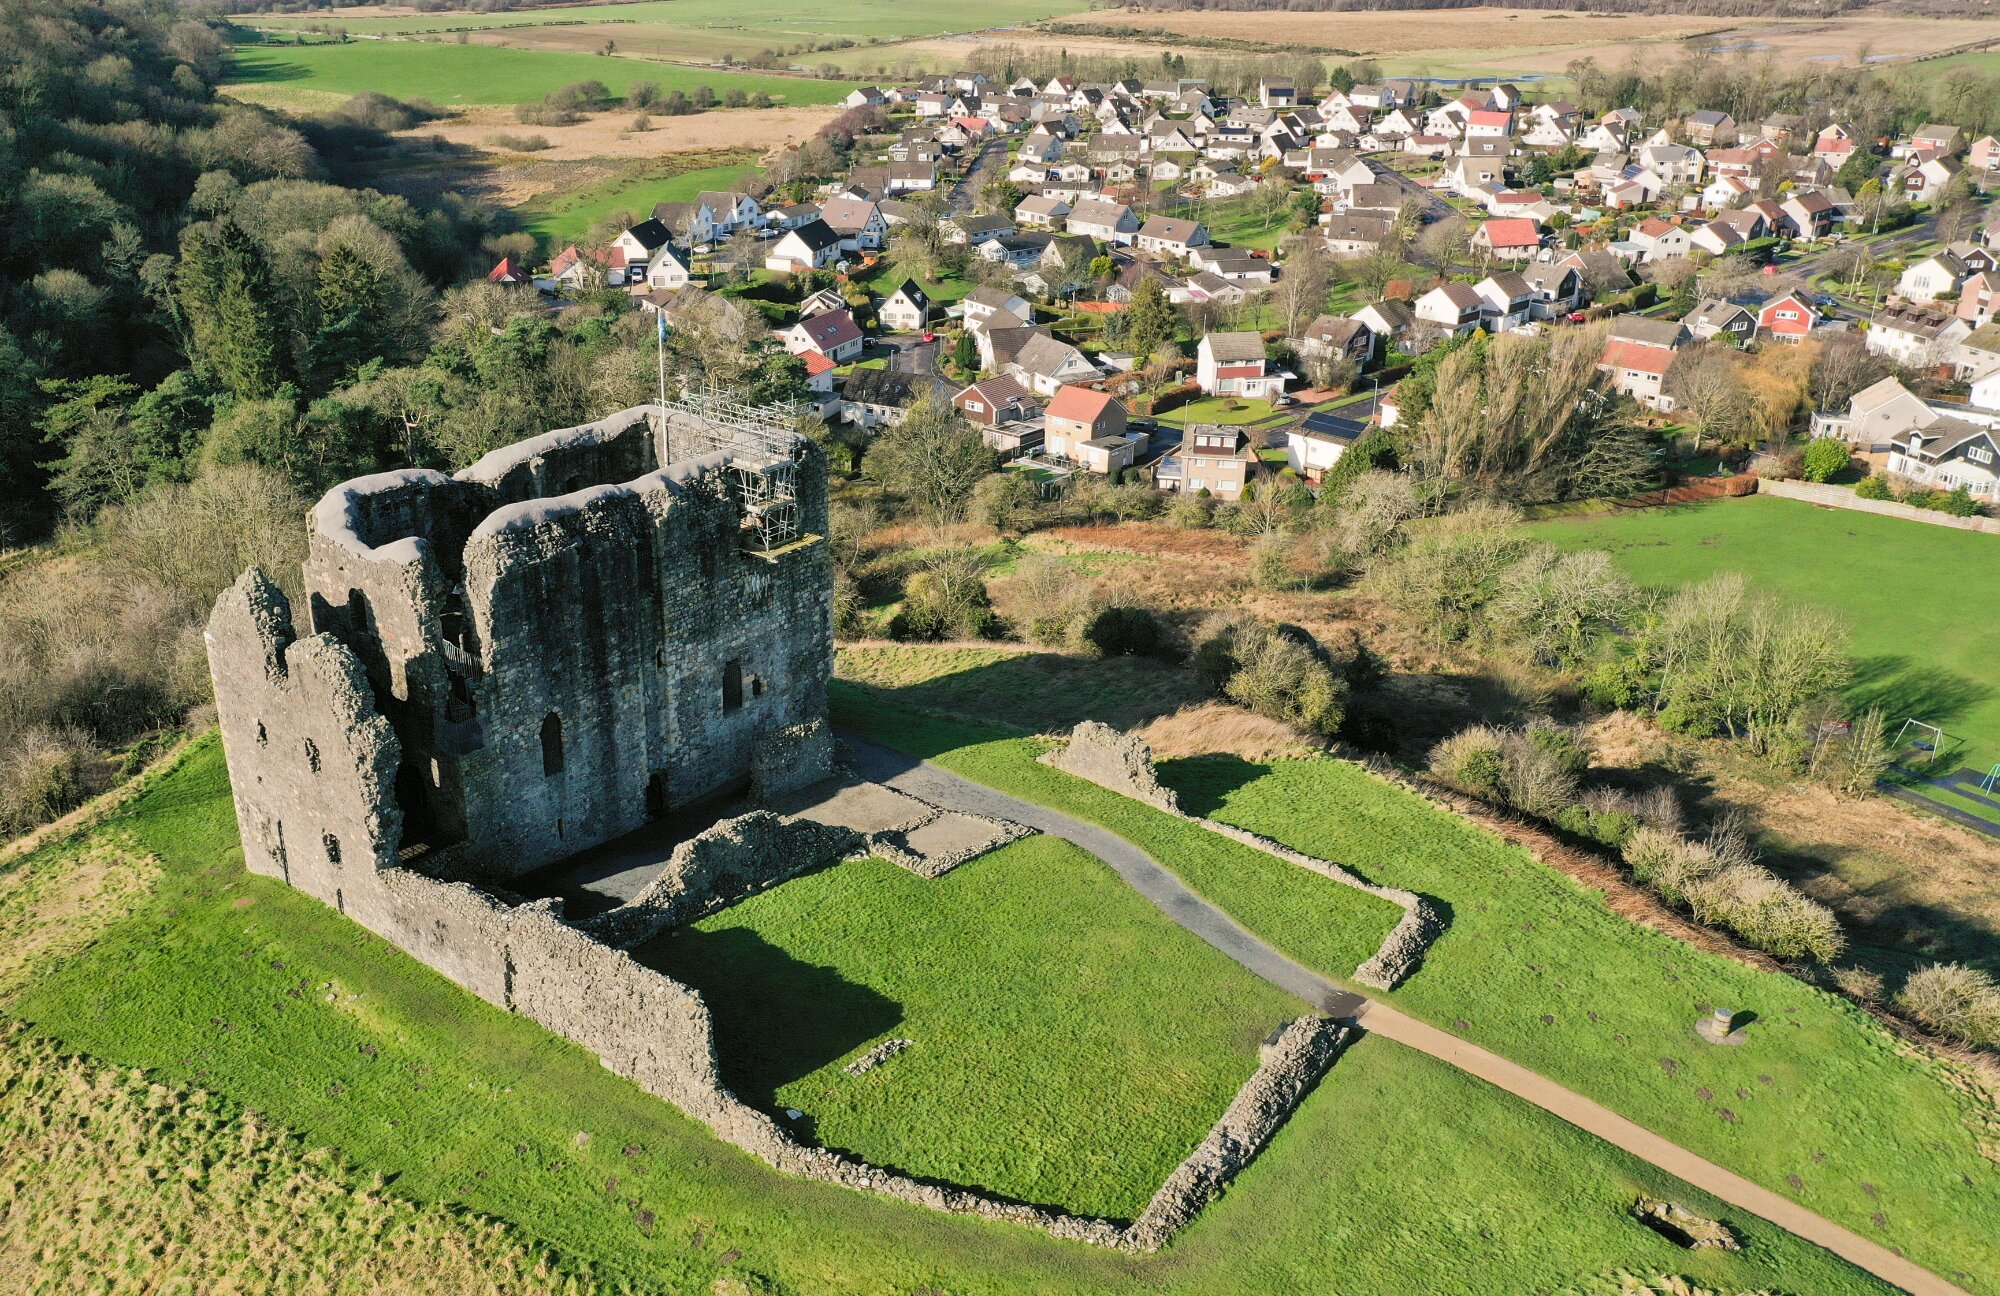 A ruined castle on a hill, with a modern housing estate in the background. The castle is a tall rectangular grey building without a roof surrounded by a low wall.